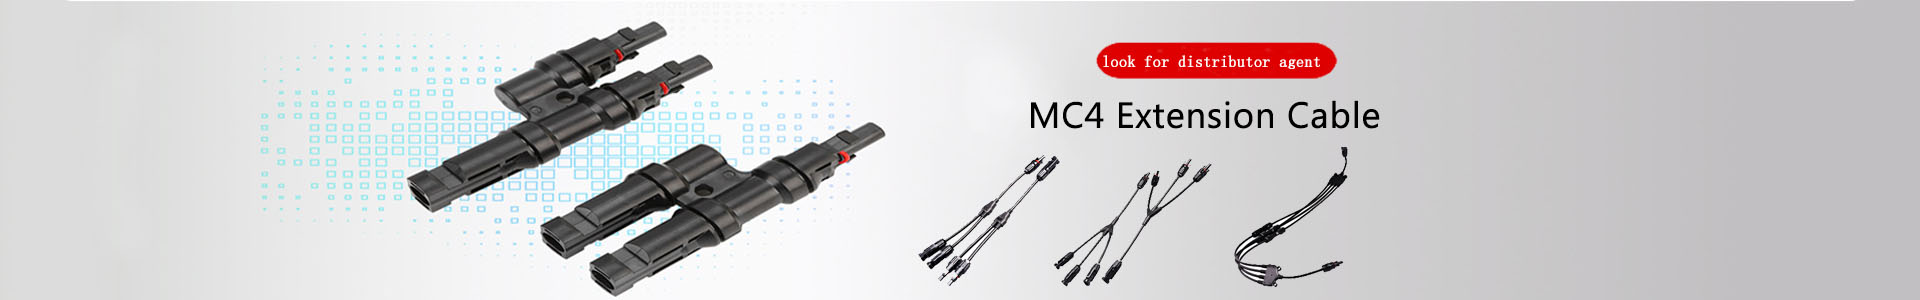 Solar Branch Connector | Handwe Group-Solar | solar connector,solar branch connector,diode fuse connector,MC4 extnsion cable,H1Z2Z2 solar cable, UL4703 solar cable | Leading manufacturer and supplier of solar pv cables and connectors